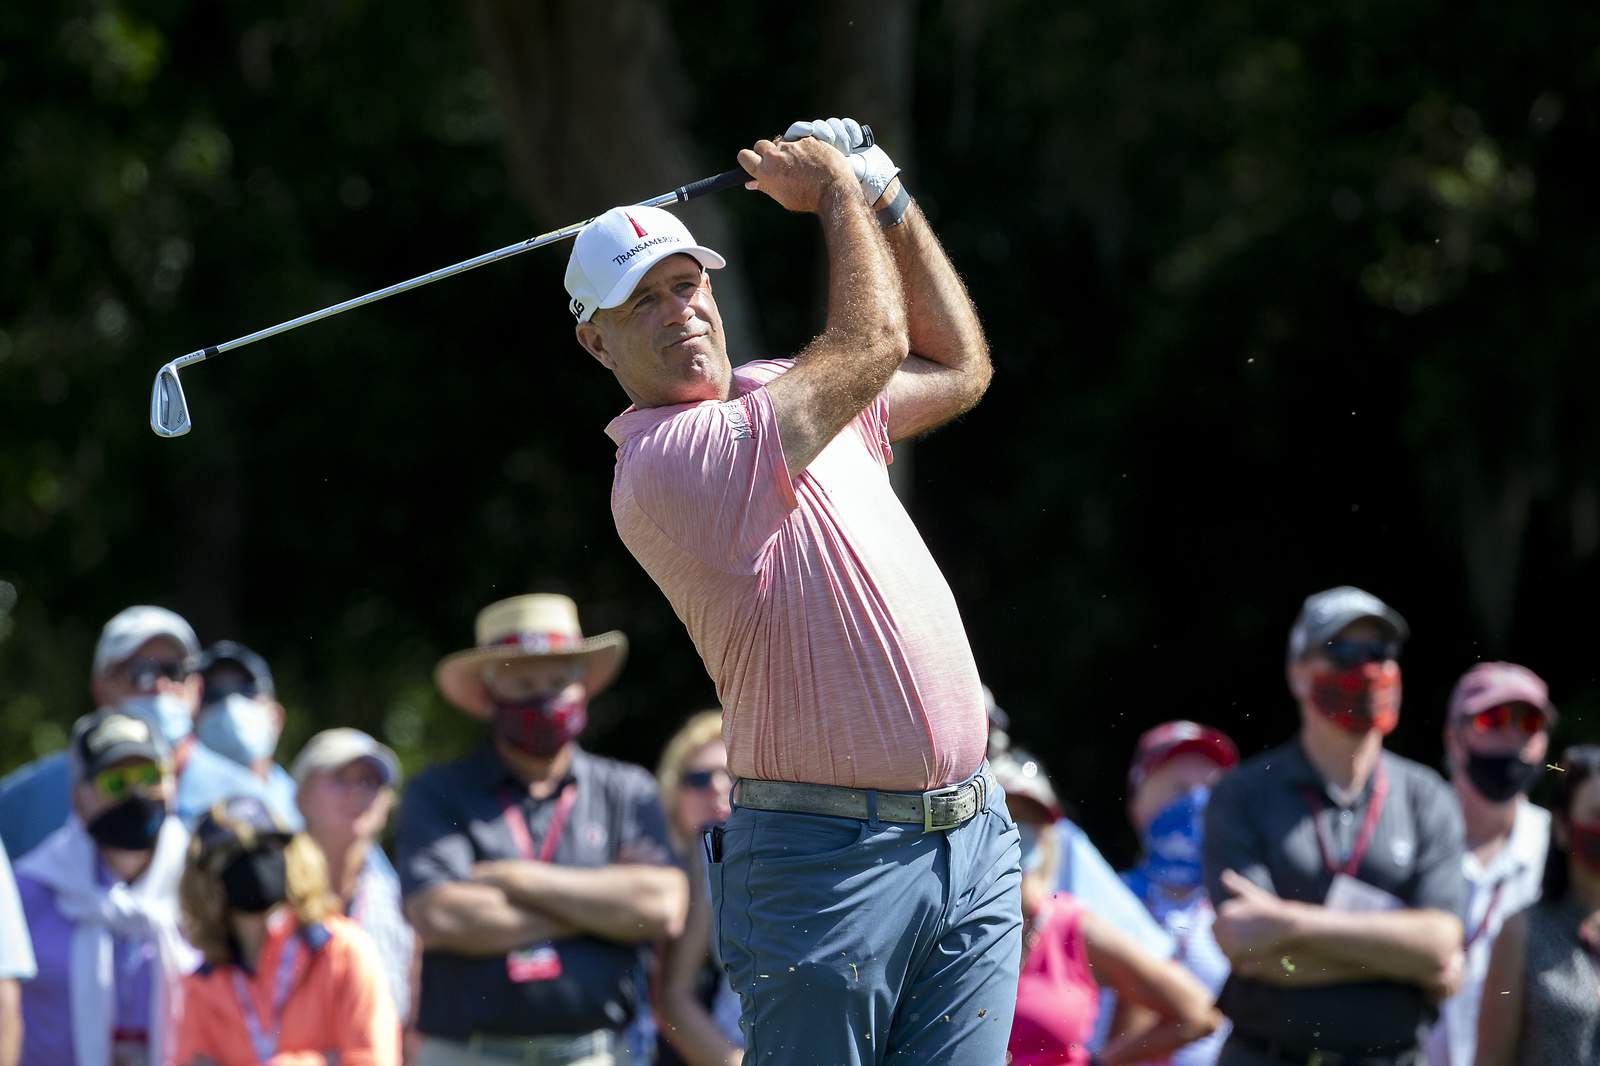 Cink sets another scoring mark, keeps lead at RBC Heritage